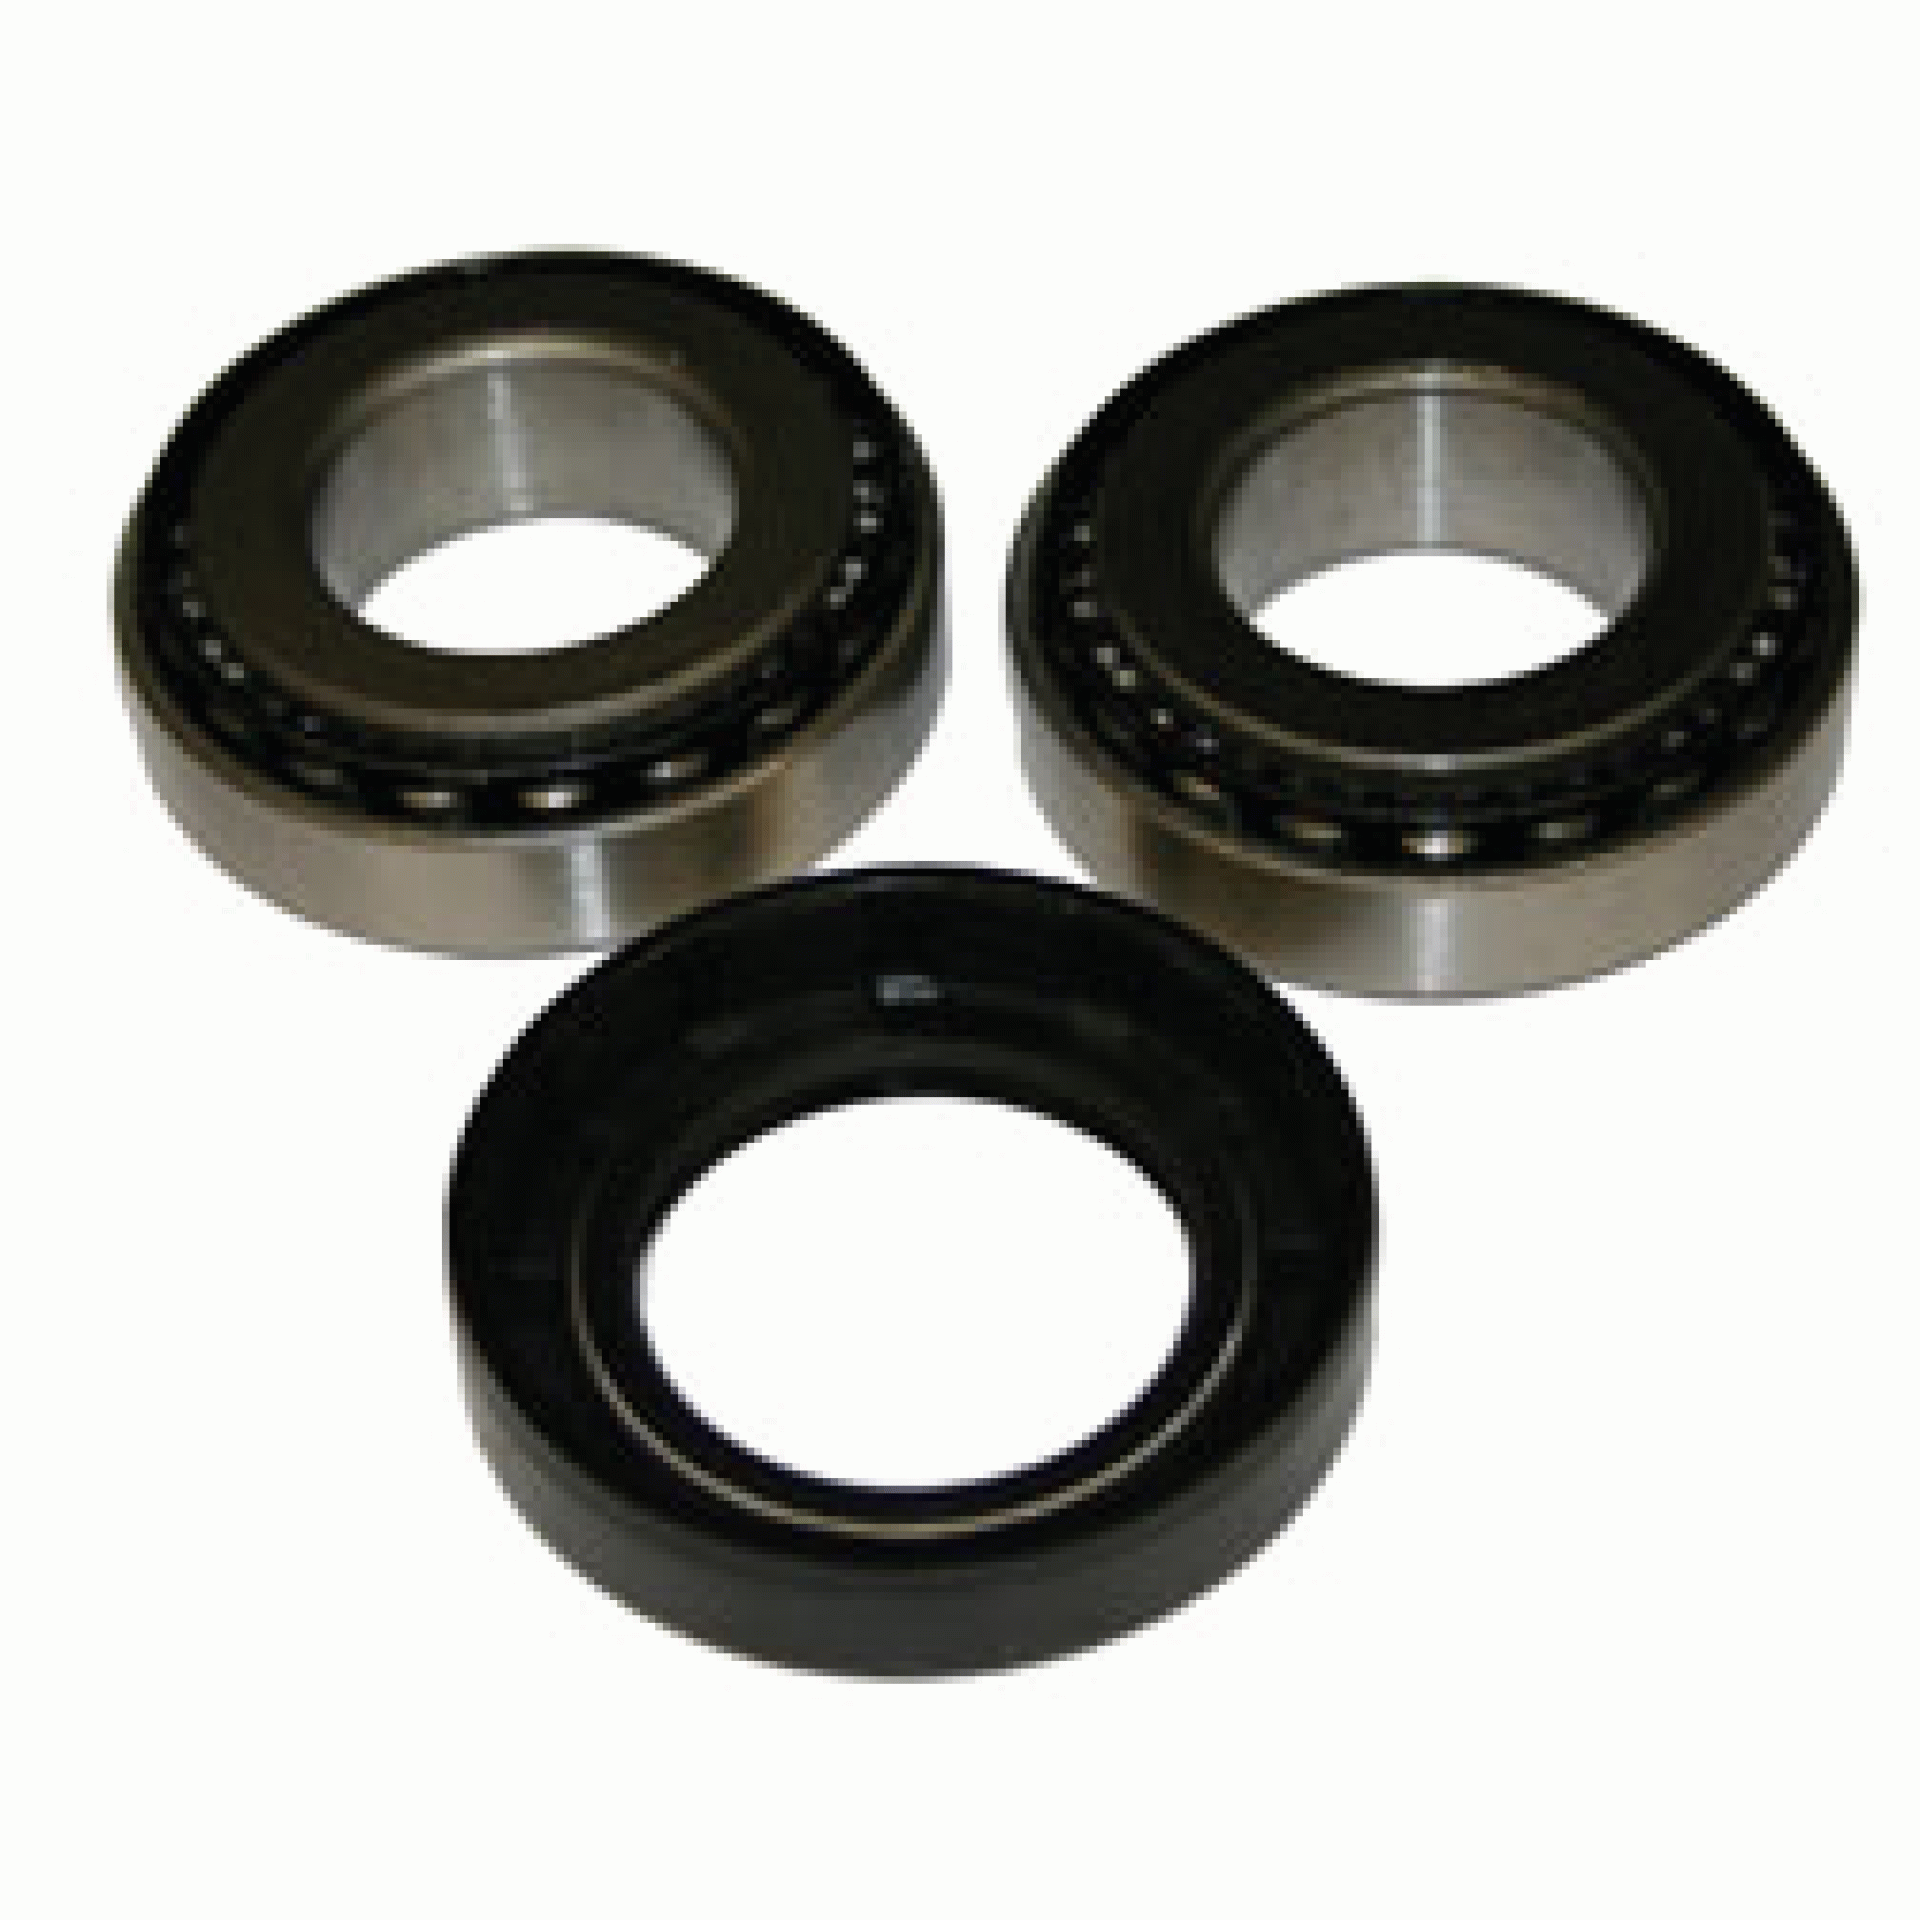 DEXTER MARINE PRODUCTS OF GEORGIA LC | K71-G02-43 | BEARING KIT- 1" STRAIGHT SPINDLE W/O DUST CAP L44643 CONE L44610 CUP